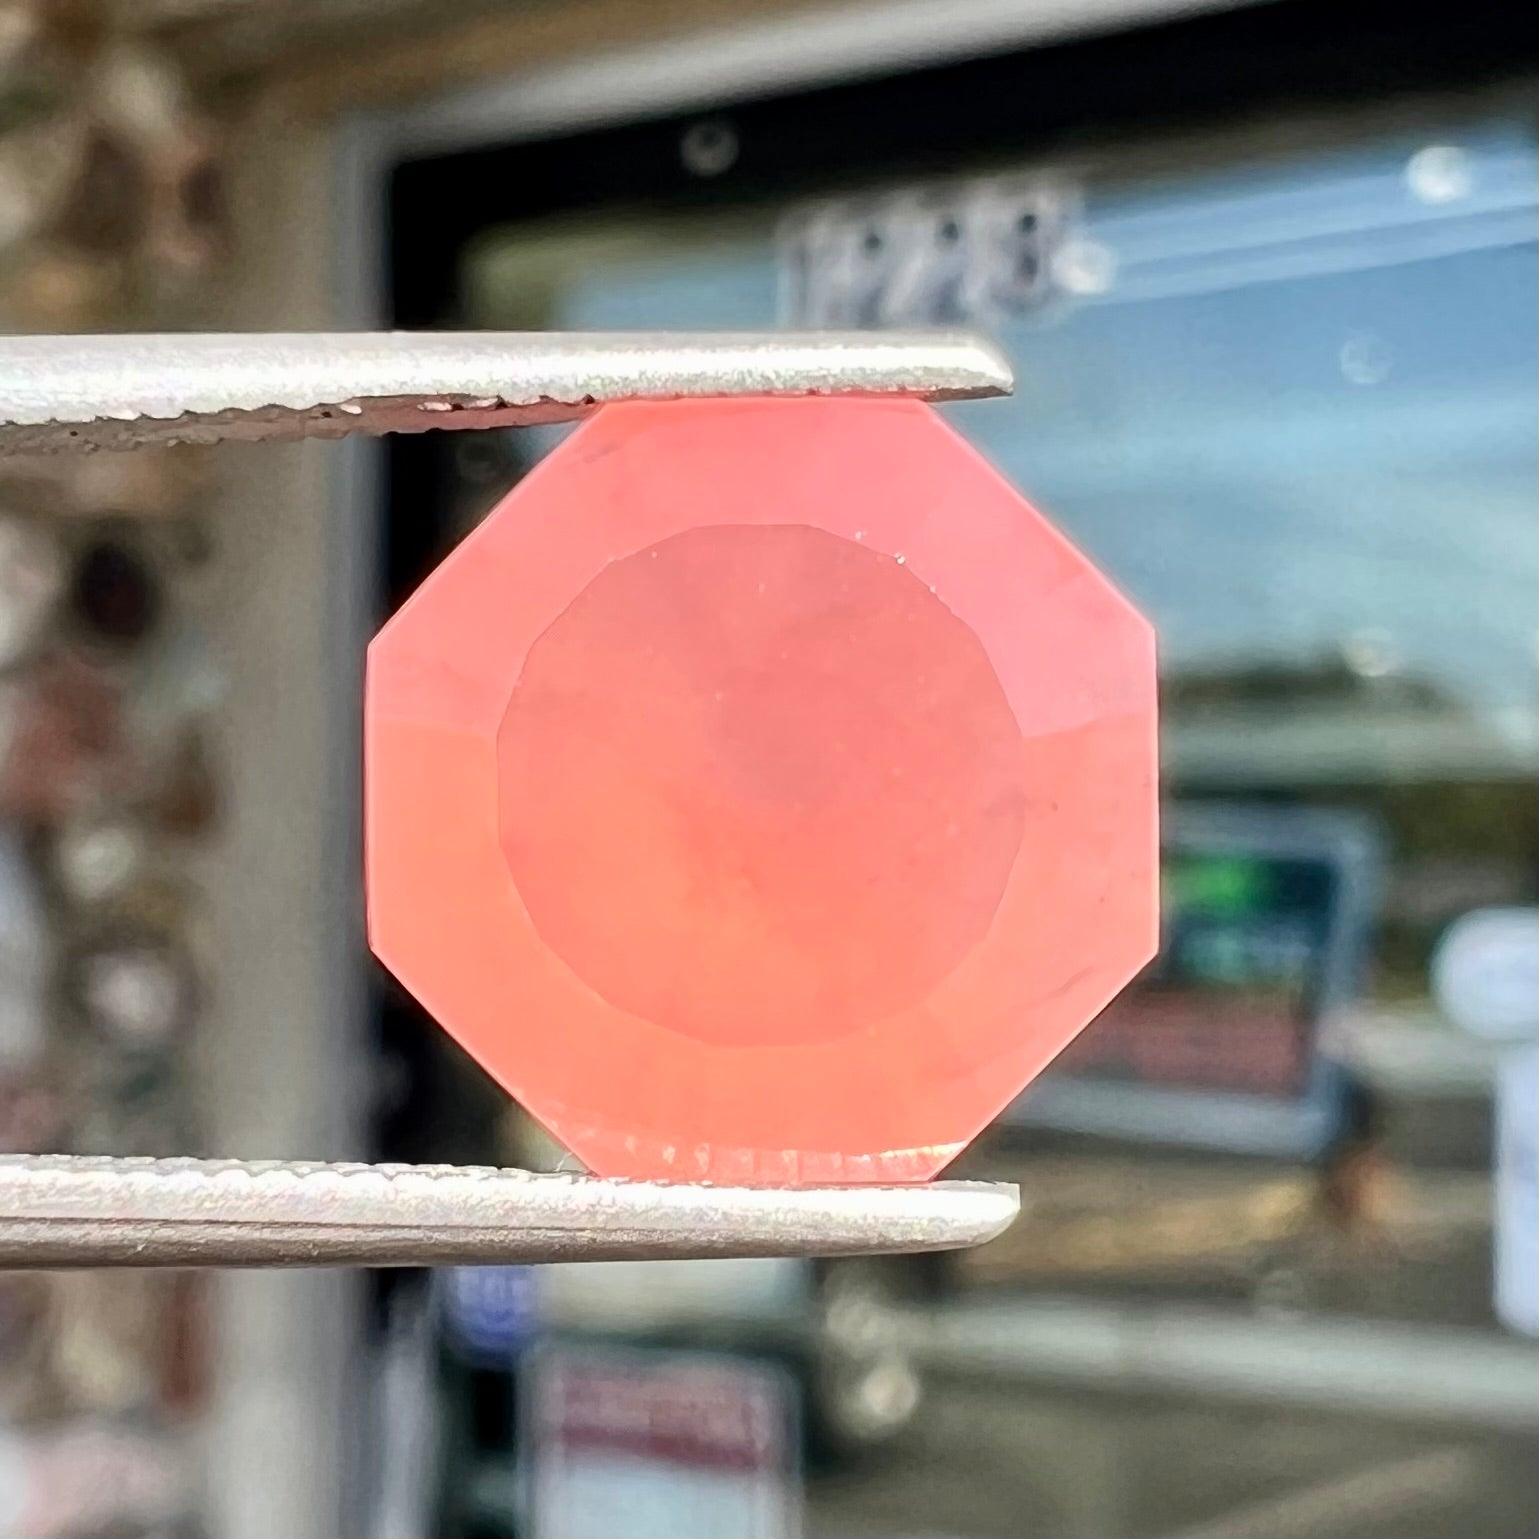 A faceted, octagon cut pink fire opal from Mexico.